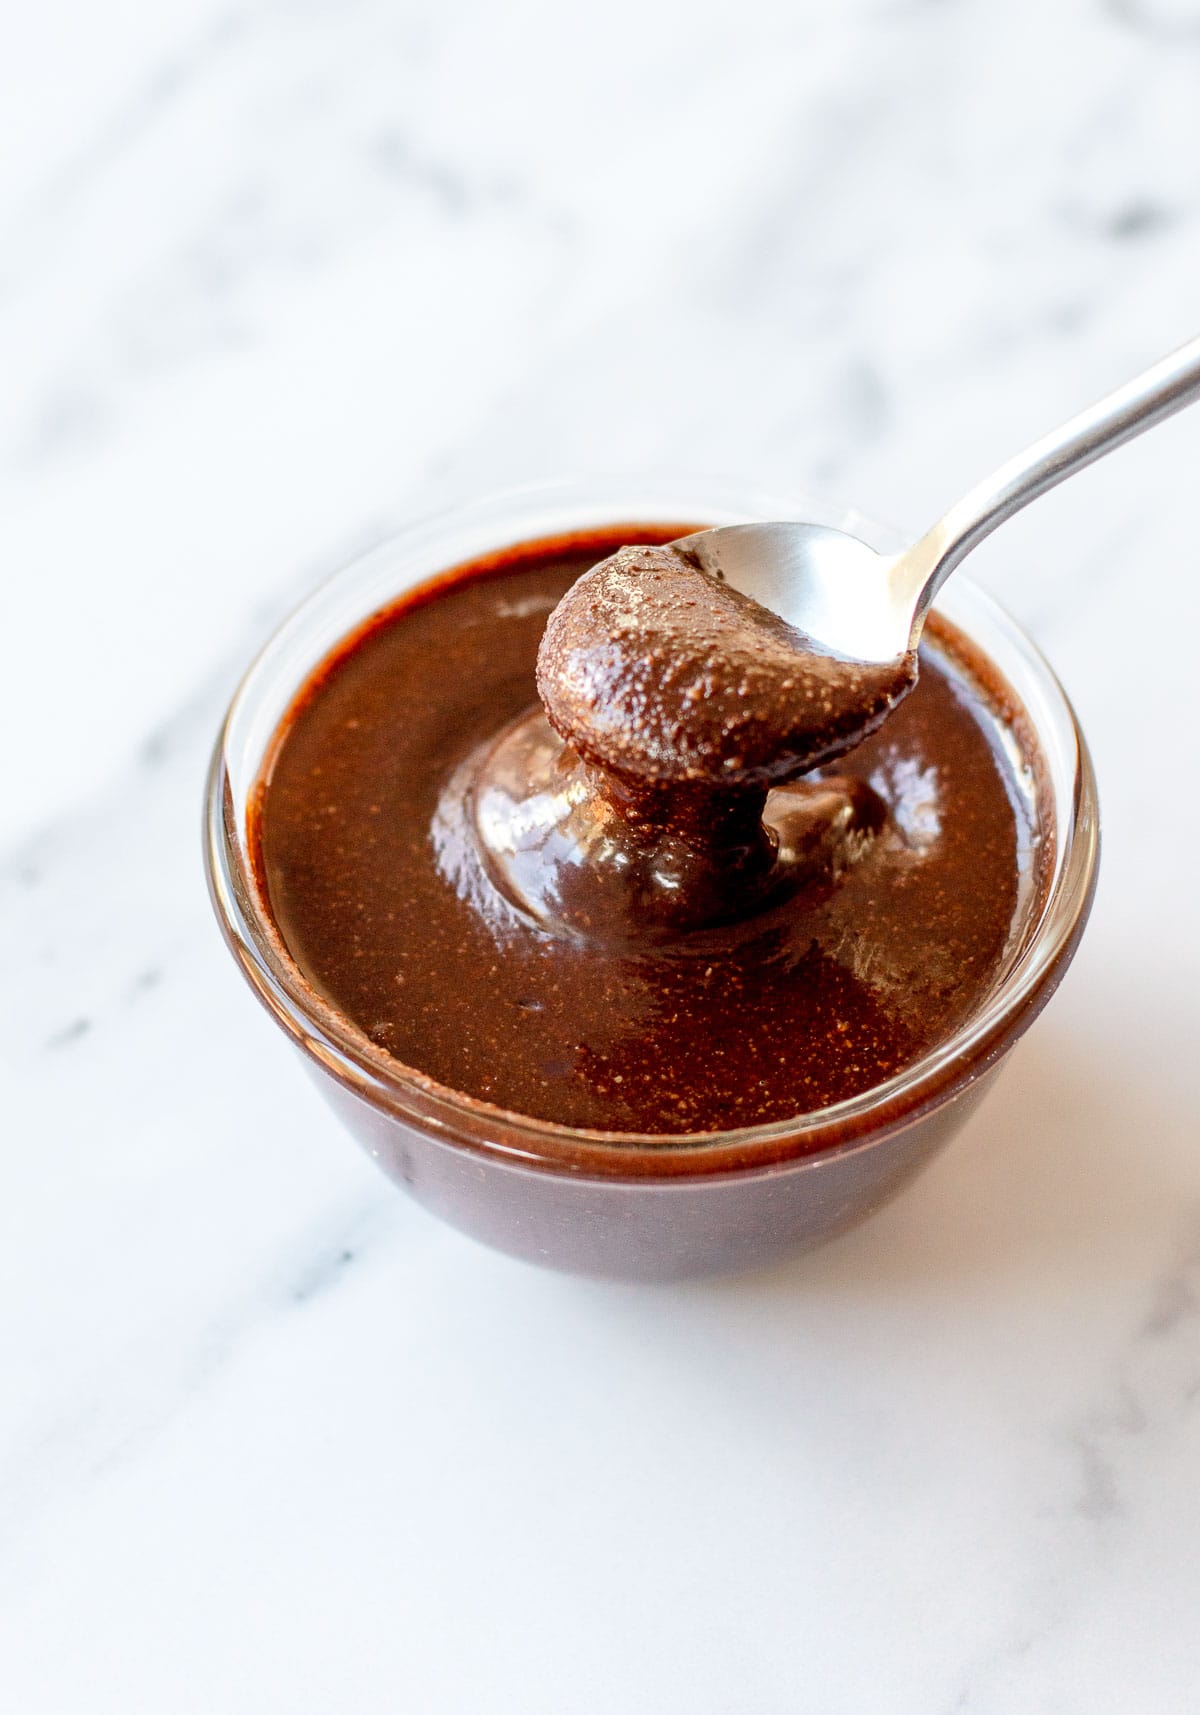 Image of Nutella in a glass bowl with a spoon.